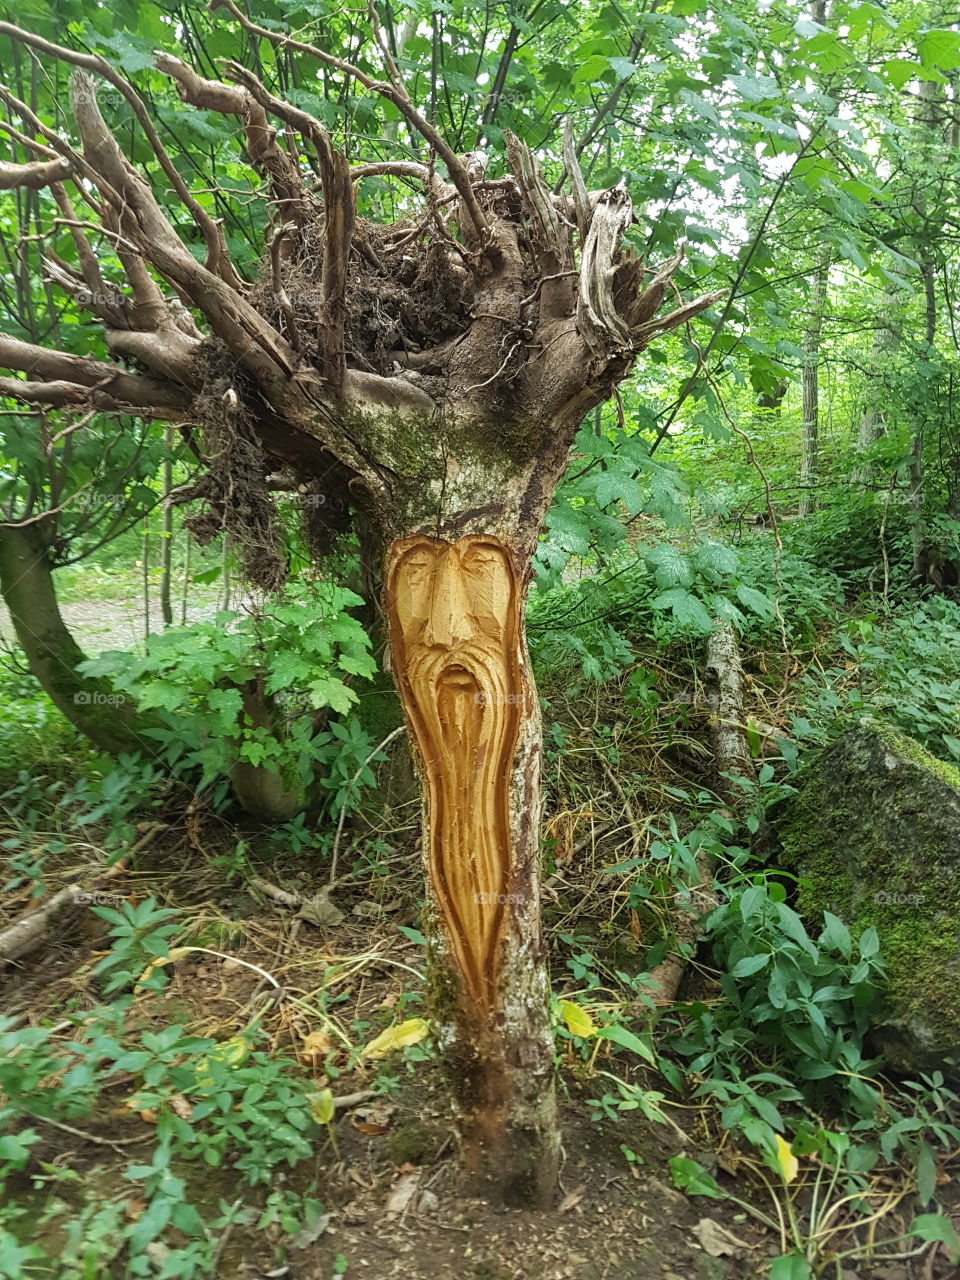 A tree with a face carved into it!